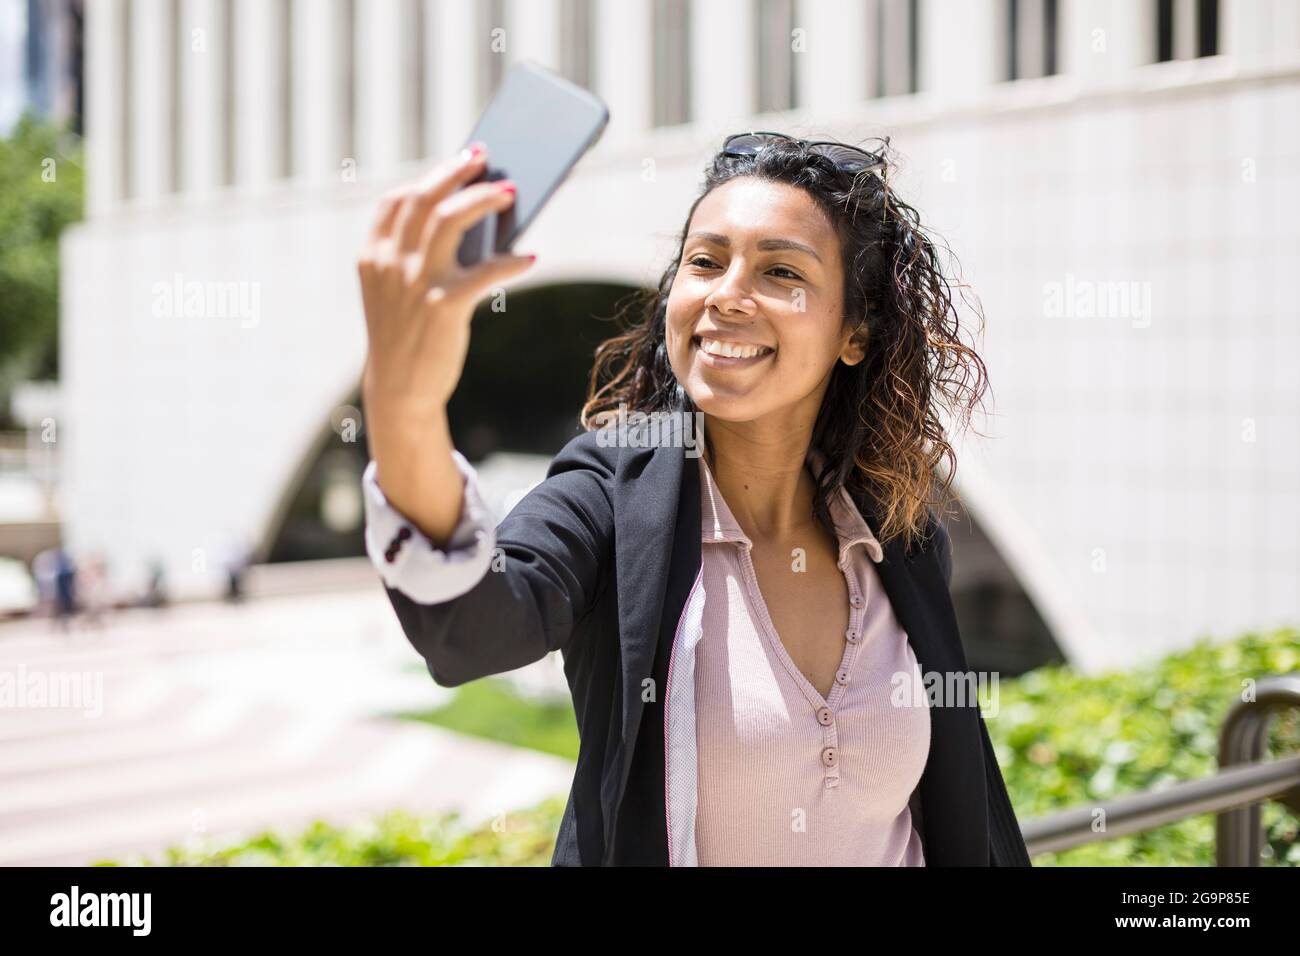 Young smiling hispanic american woman taking a selfie outdoors with her smart phone. Space for text. Stock Photo